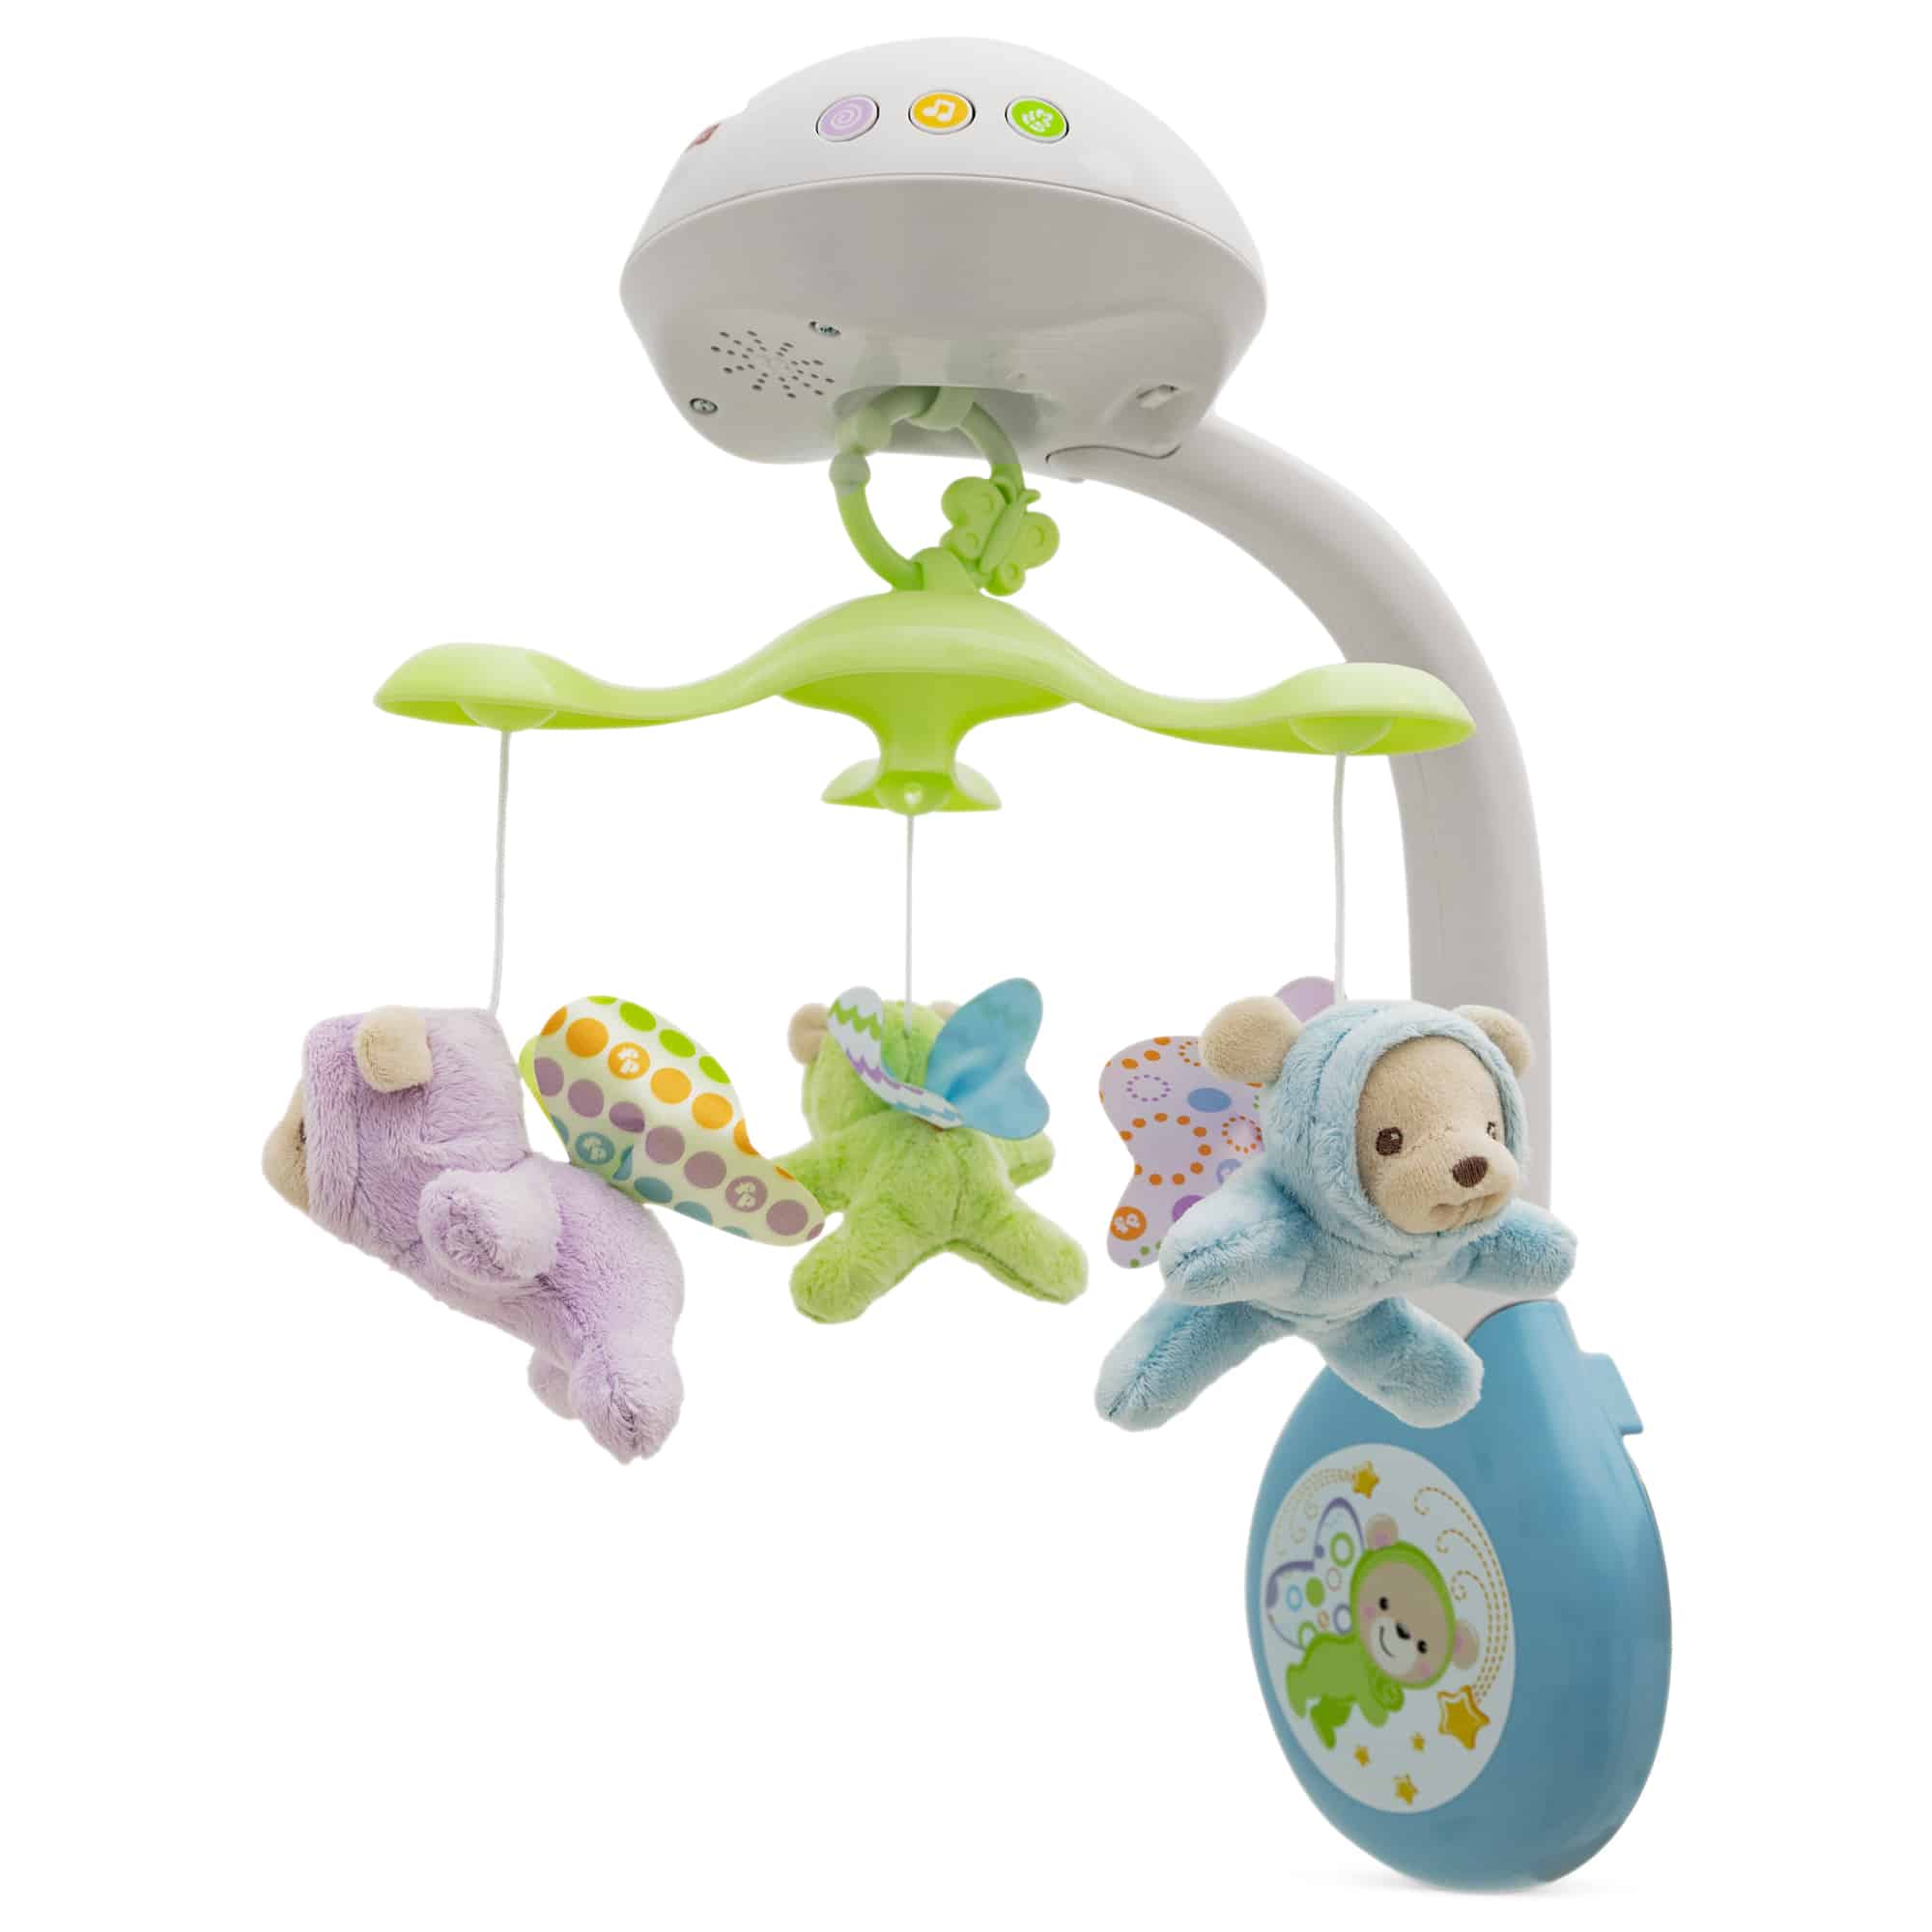 3-in-1 Traumbärchen Mobile Fisher Price 2000568470602 1